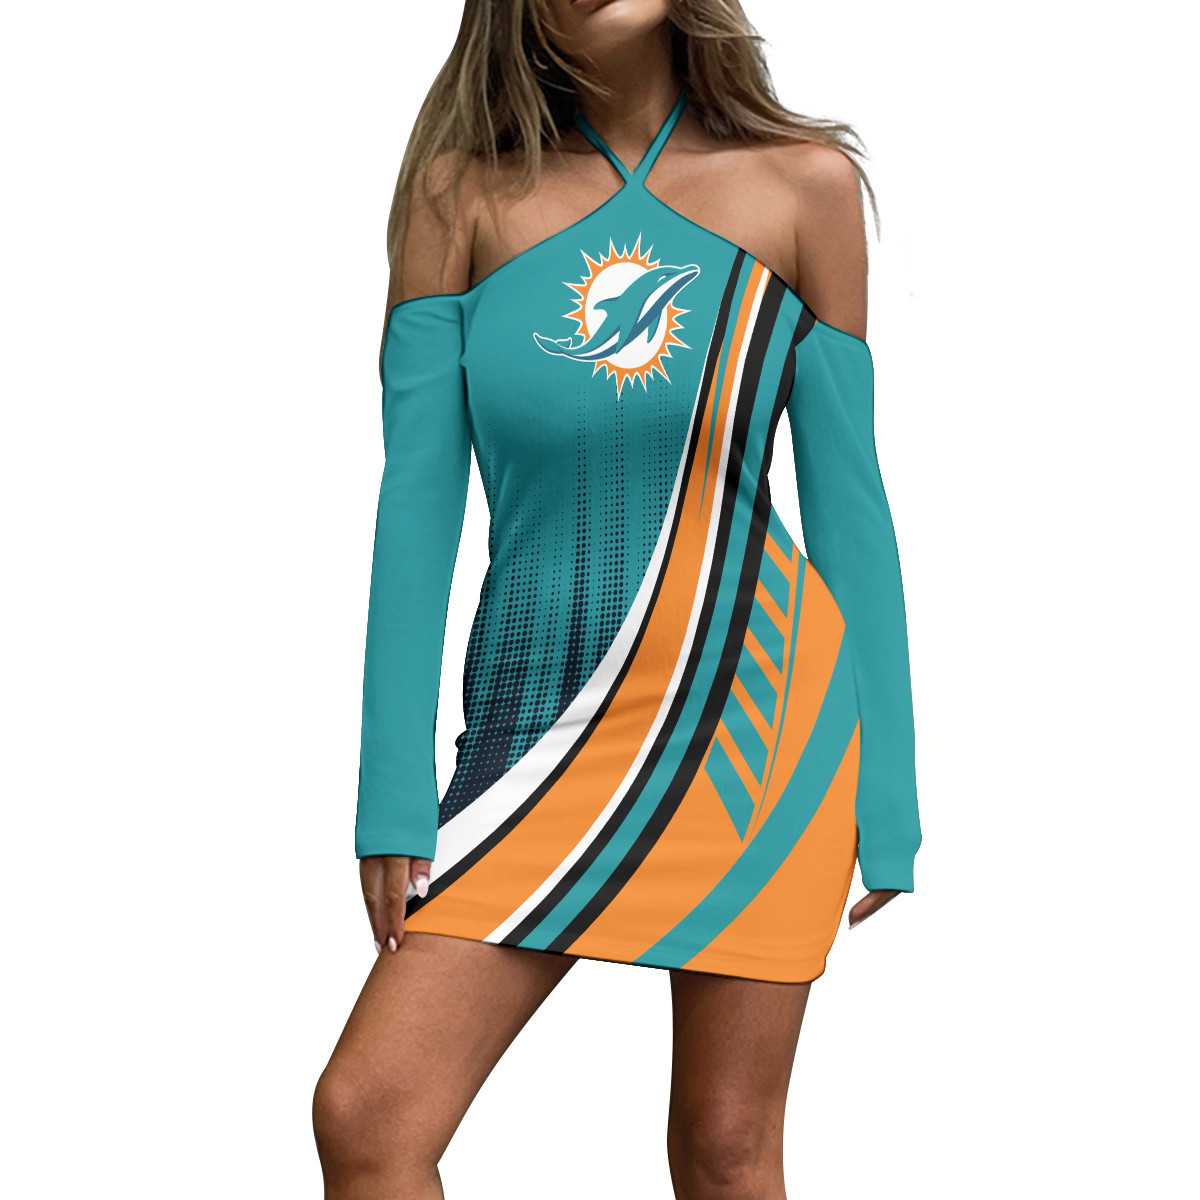 Miami Dolphins Limited Edition Summer All-Over Print Women's Halter ...